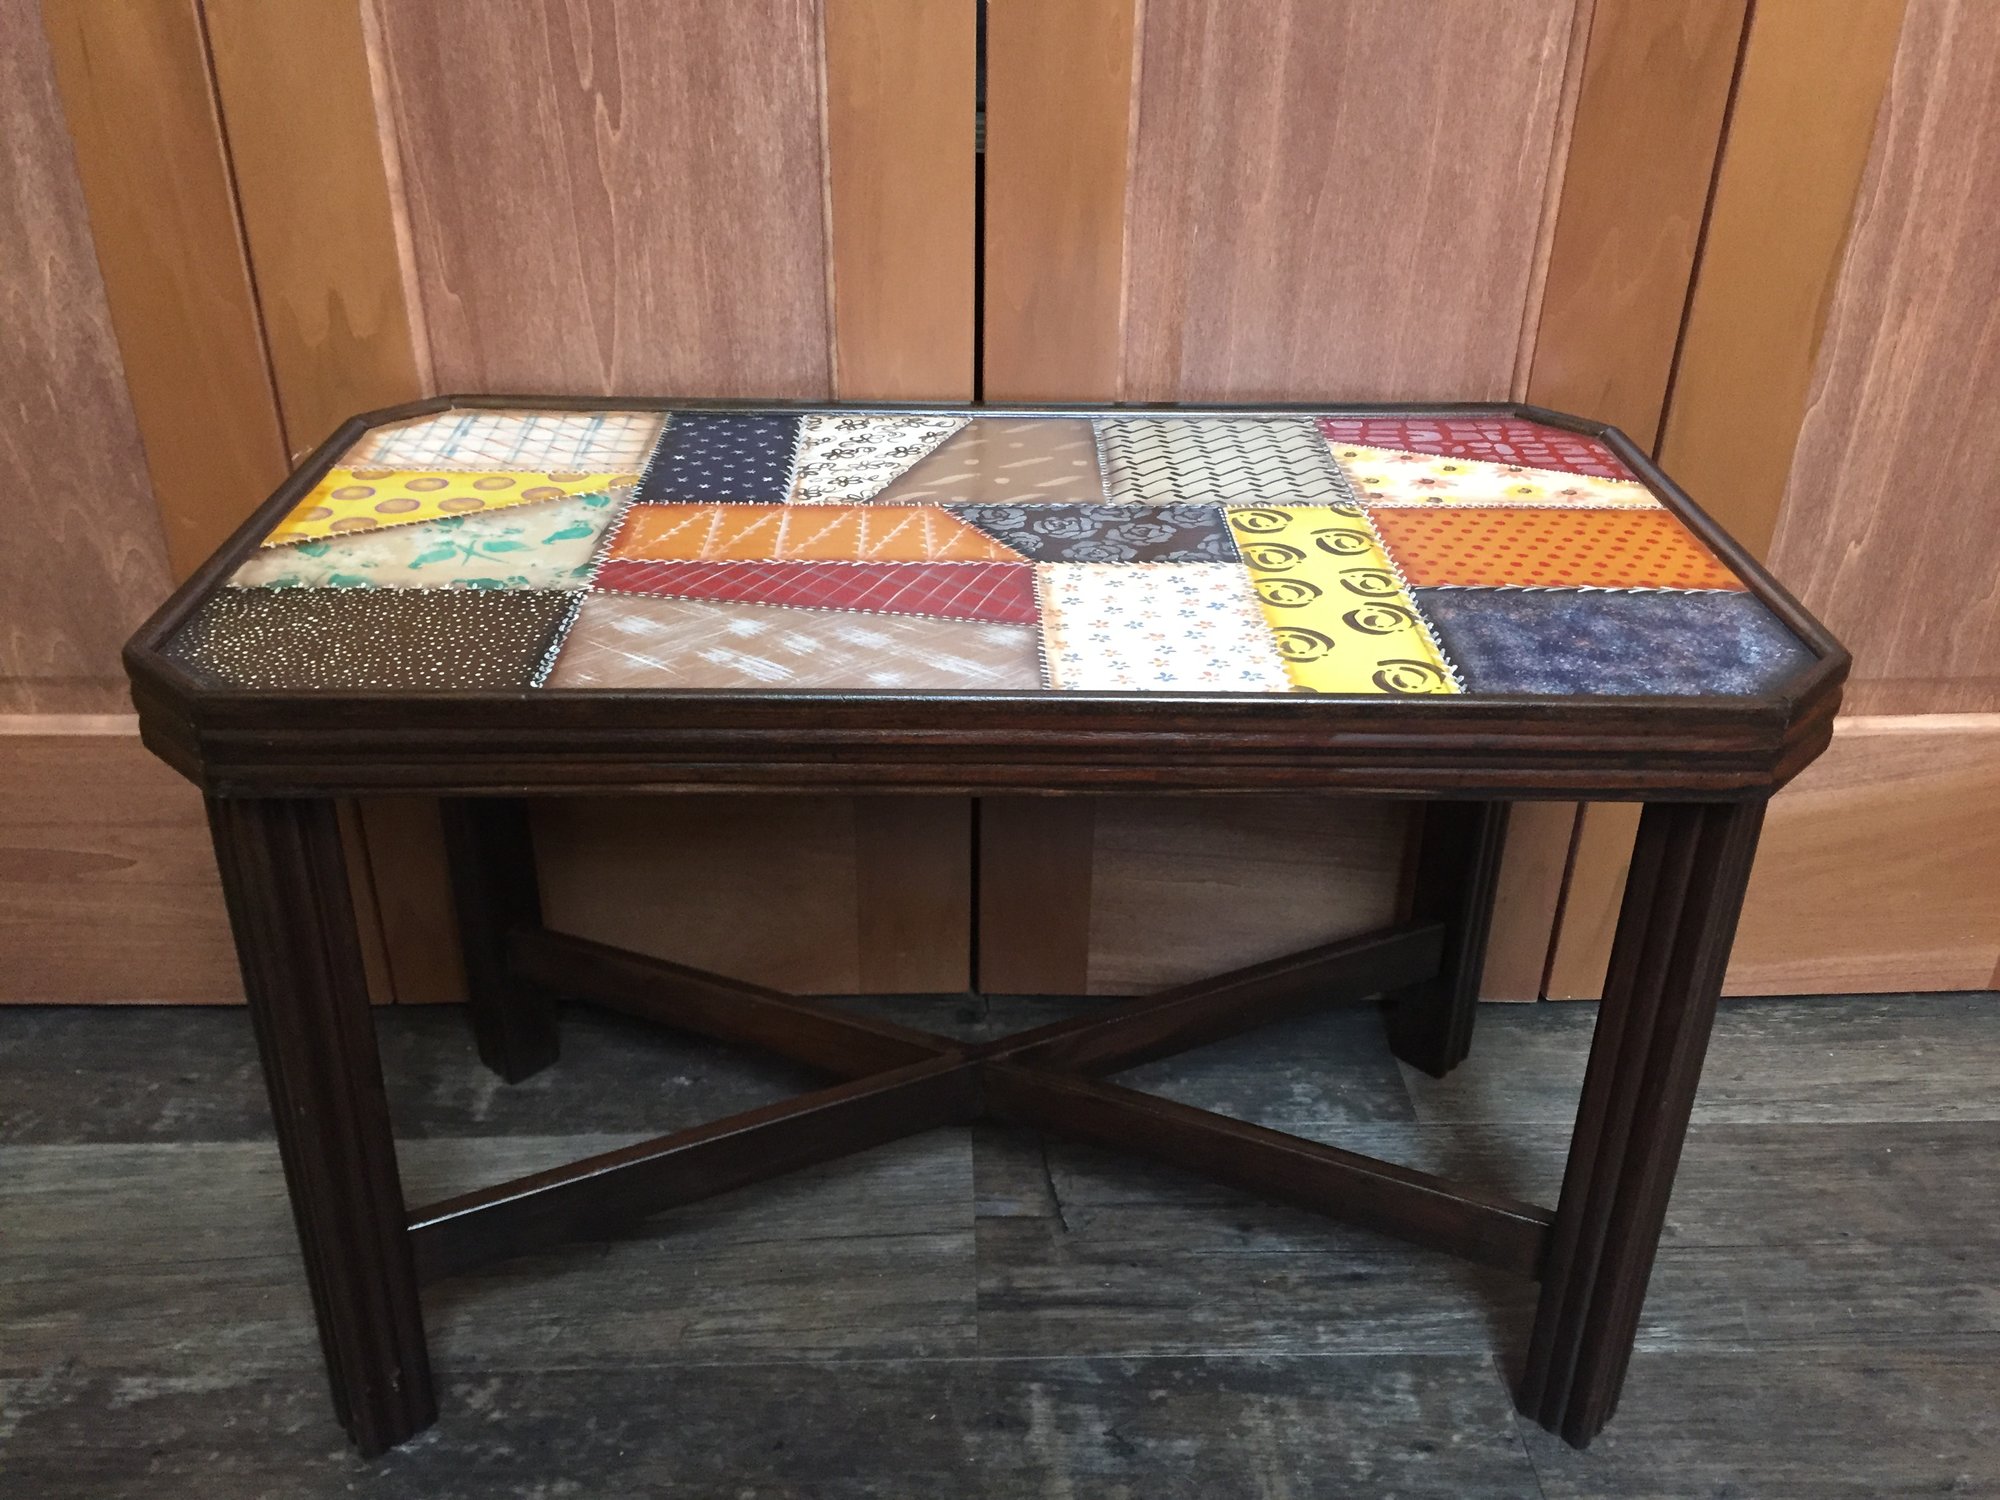 LONG SIDE TABLE

HAND PAINTED TO THE EXTREME...WARM COLORS OF PLAID/ABSTRACT

H: 17 INCHES    W: 26.5 INCHES

INSTORE PICK-UP ONLY